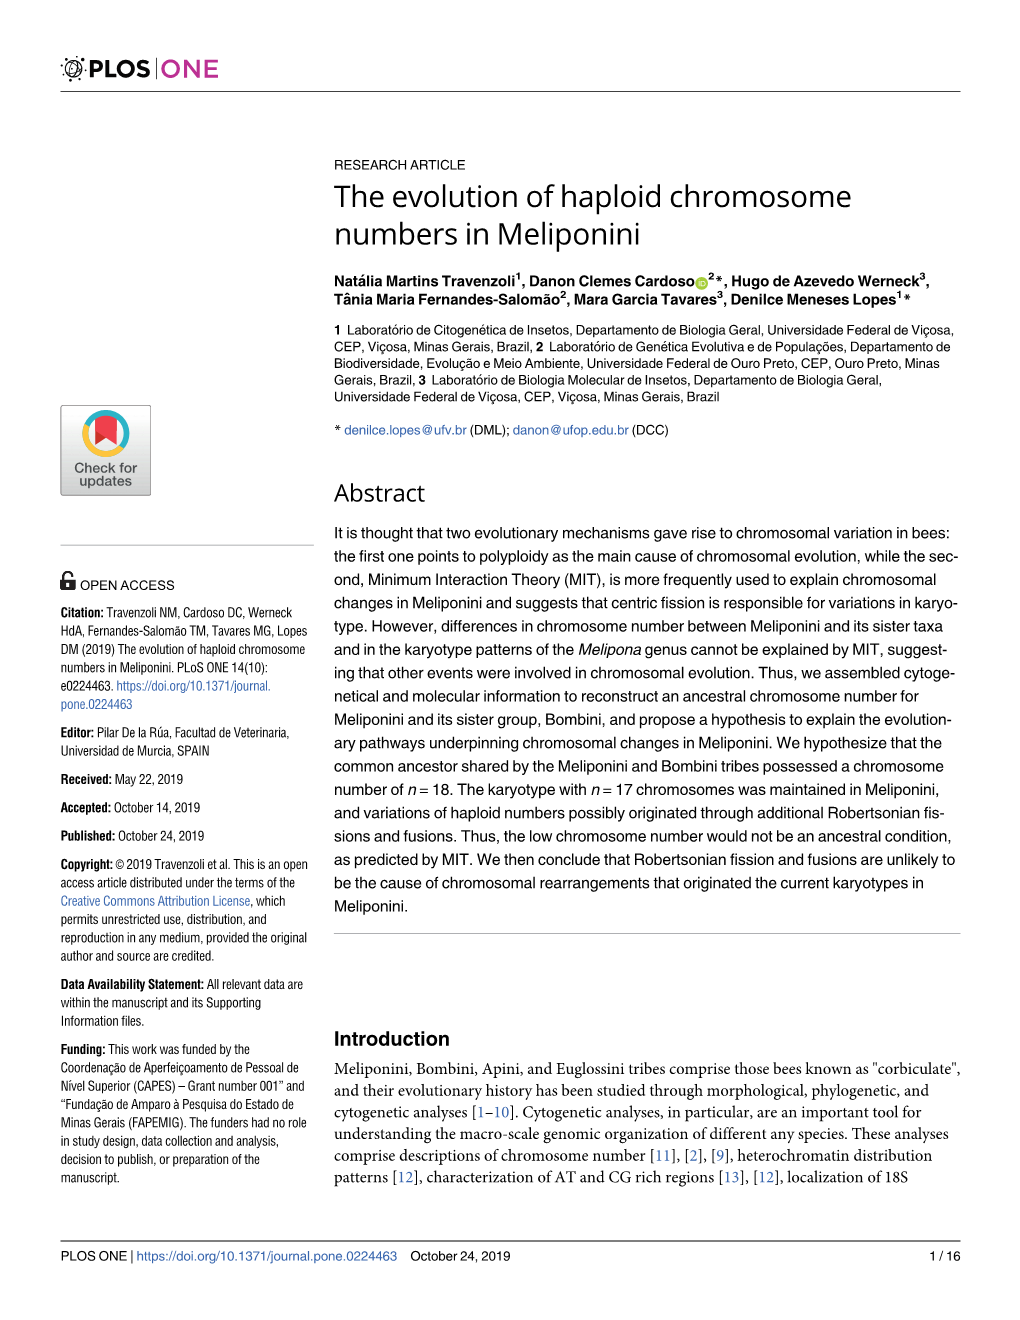 The Evolution of Haploid Chromosome Numbers in Meliponini